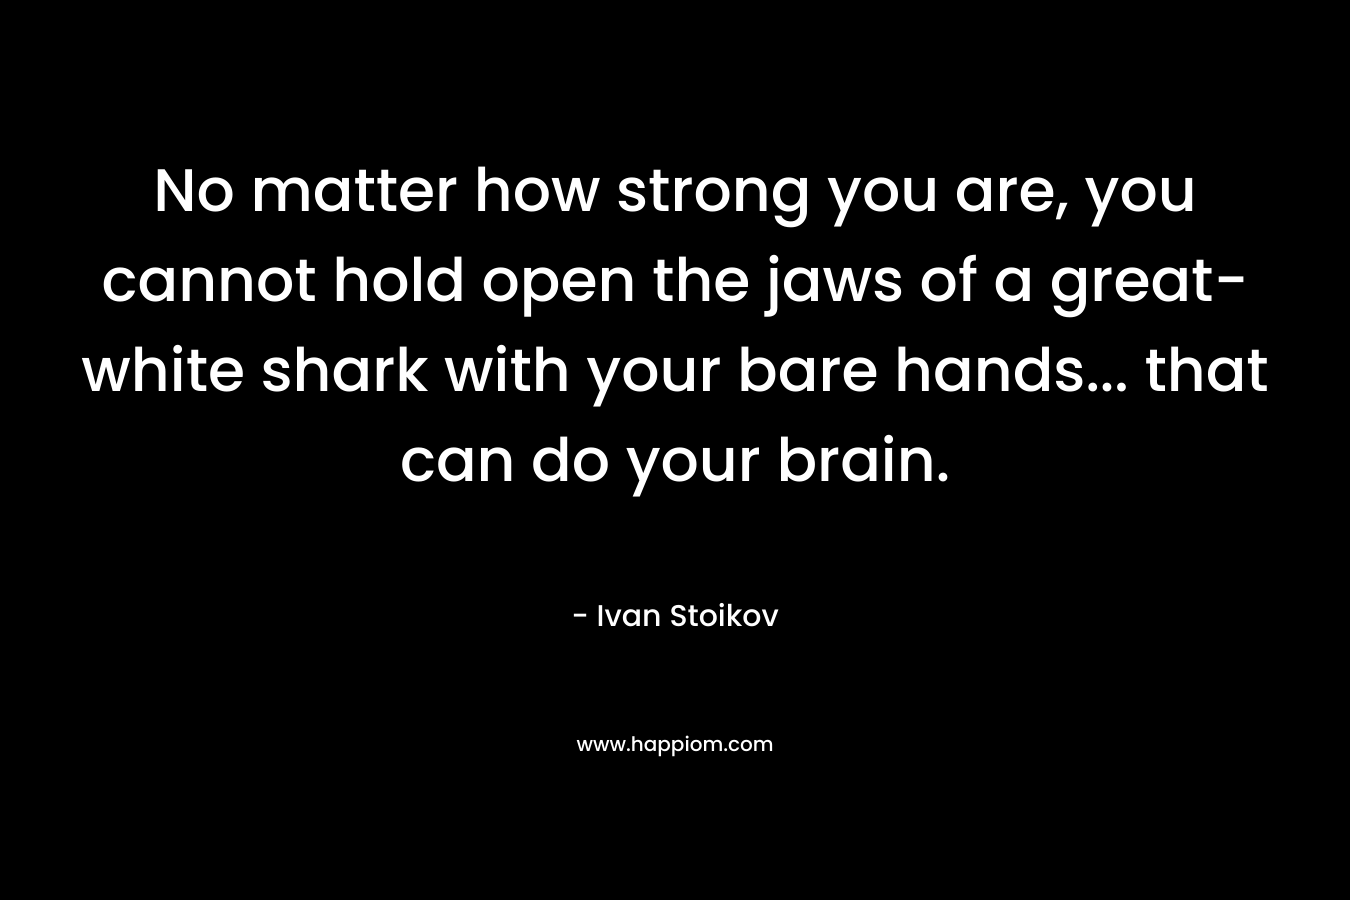 No matter how strong you are, you cannot hold open the jaws of a great-white shark with your bare hands… that can do your brain. – Ivan Stoikov